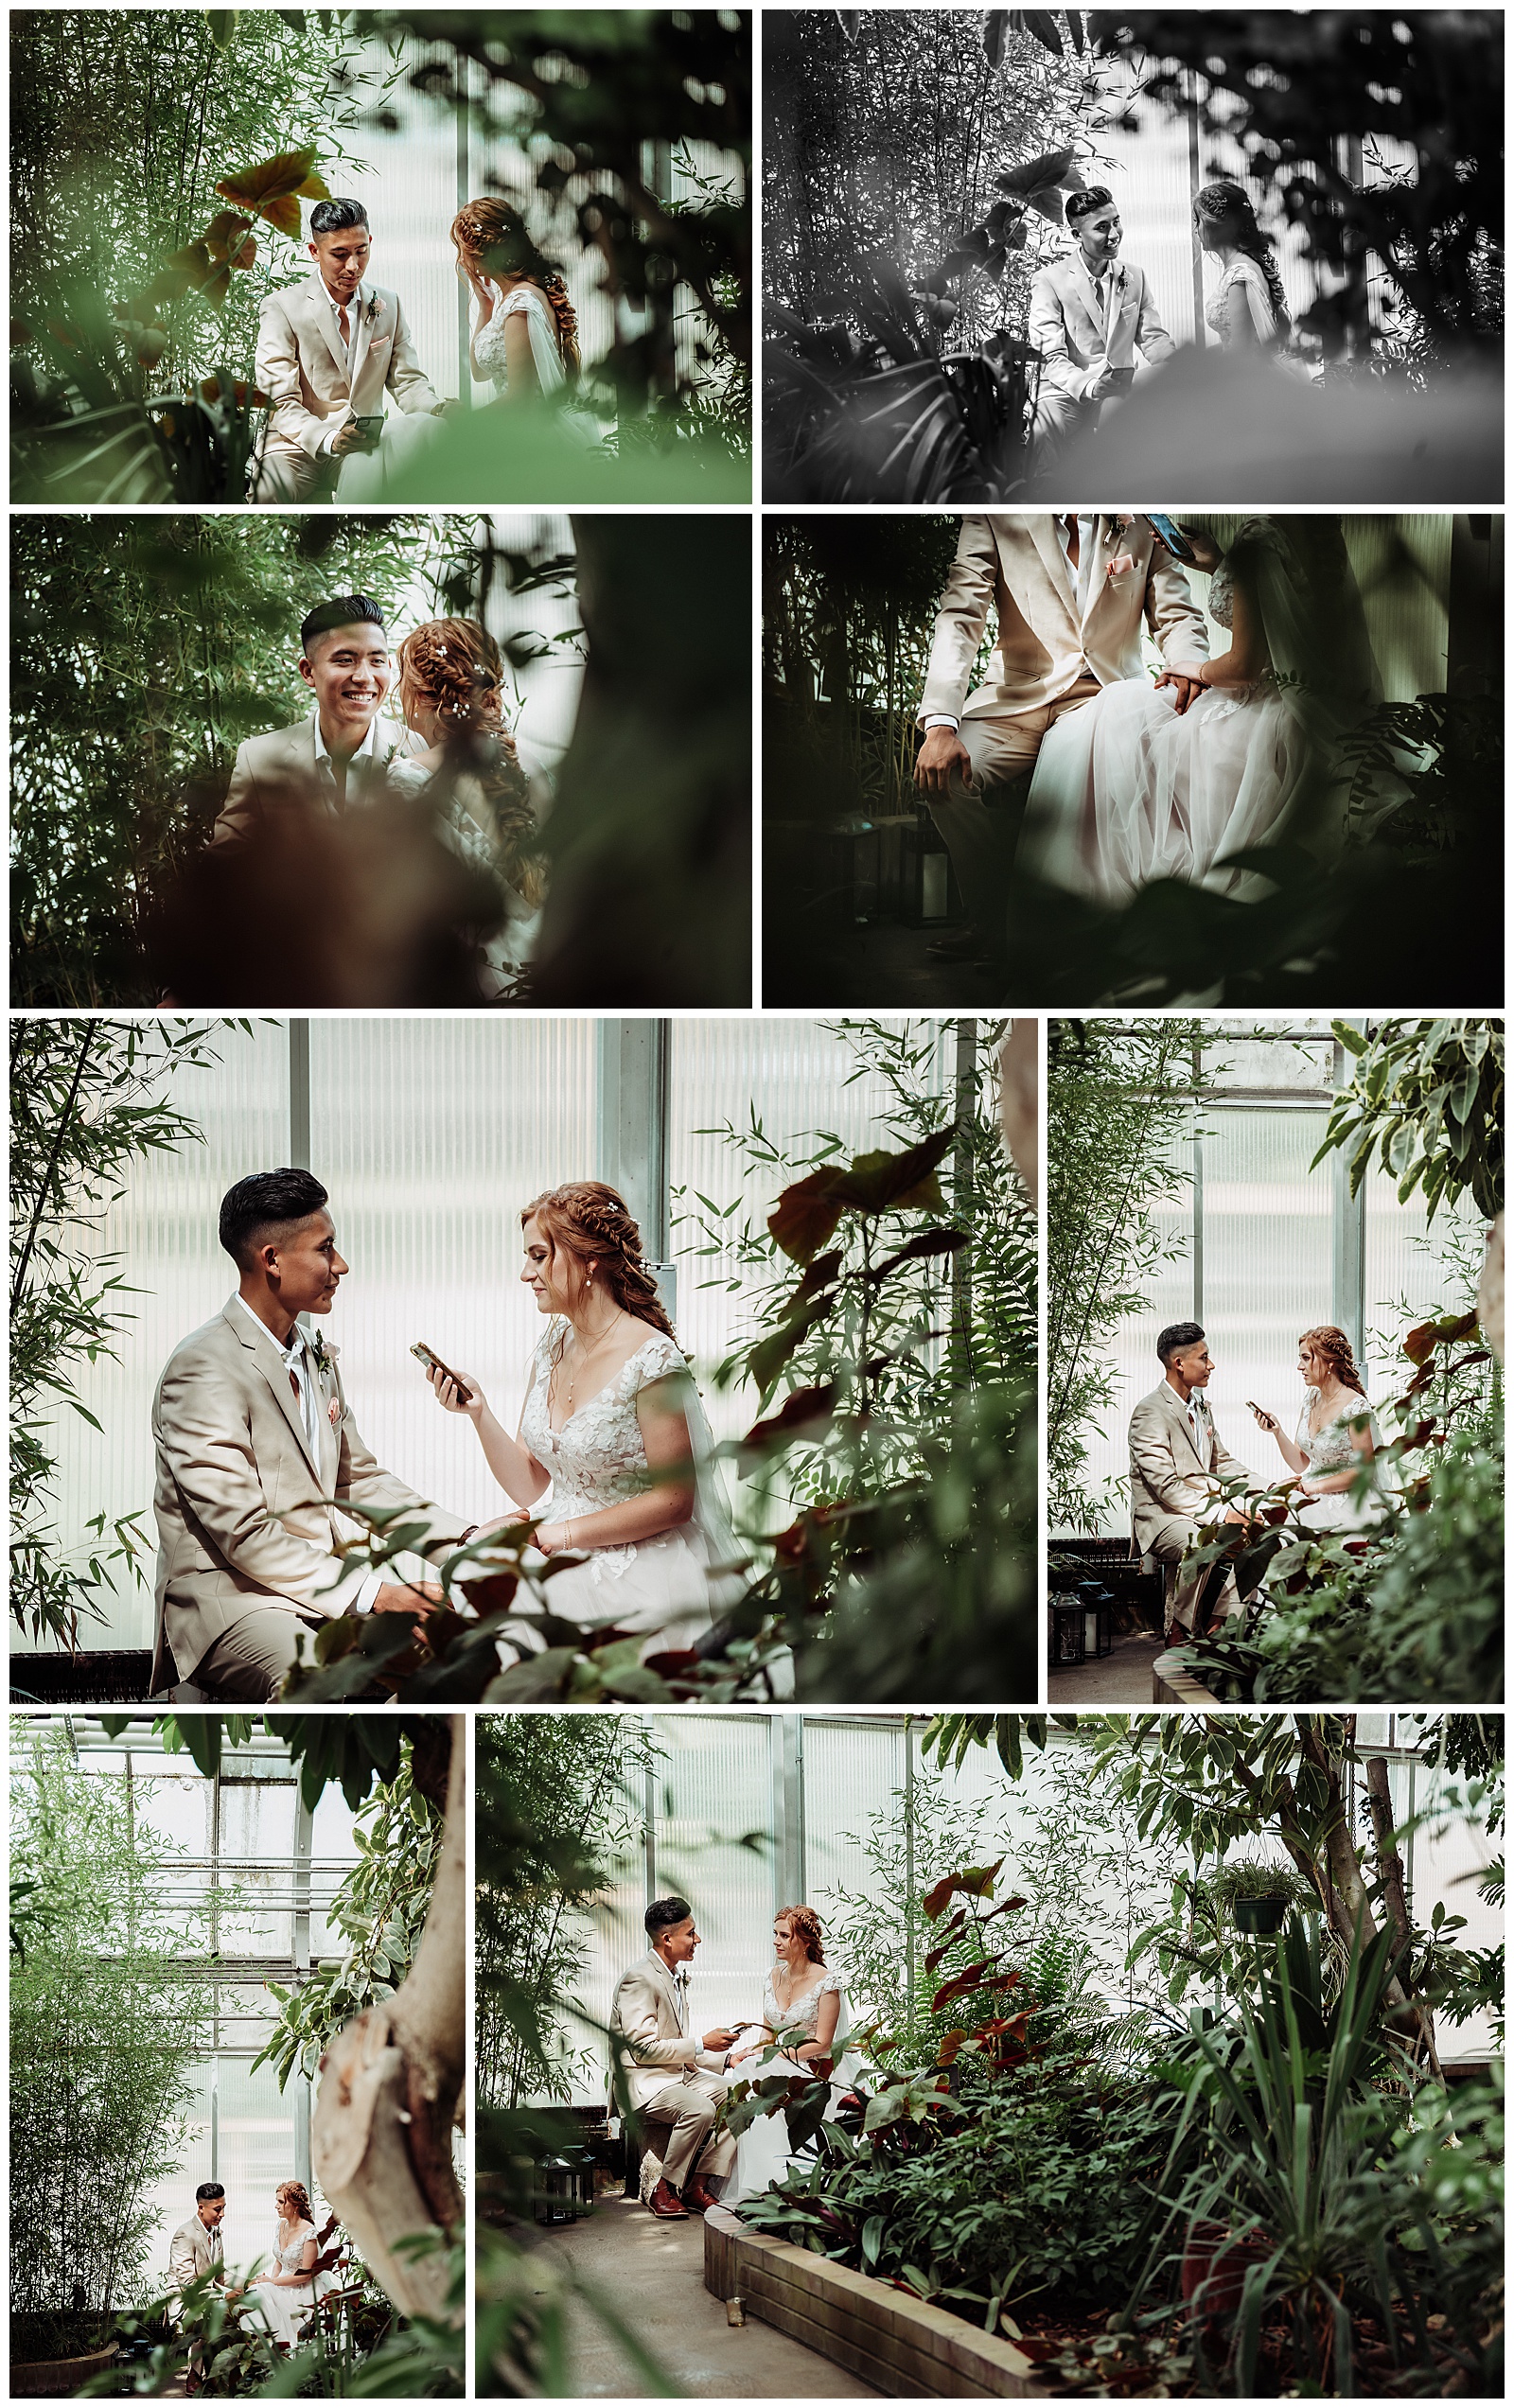 Private vow exchange in the greenhouse